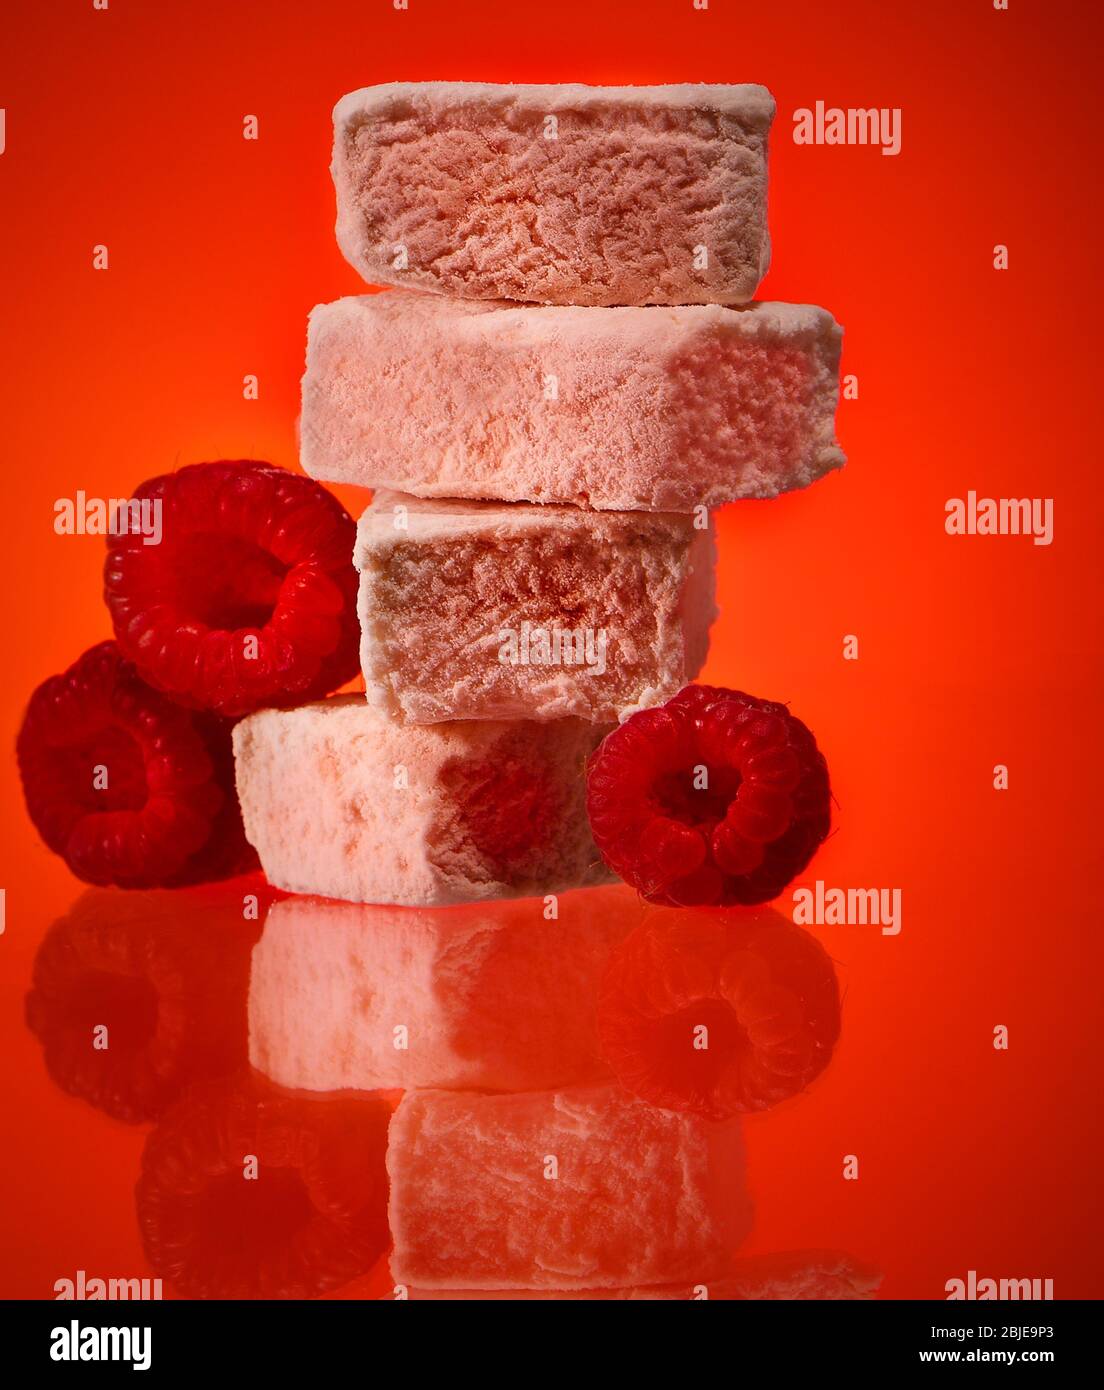 Luxury raspberry marshmallows photographed on a red background in the studio. Stock Photo